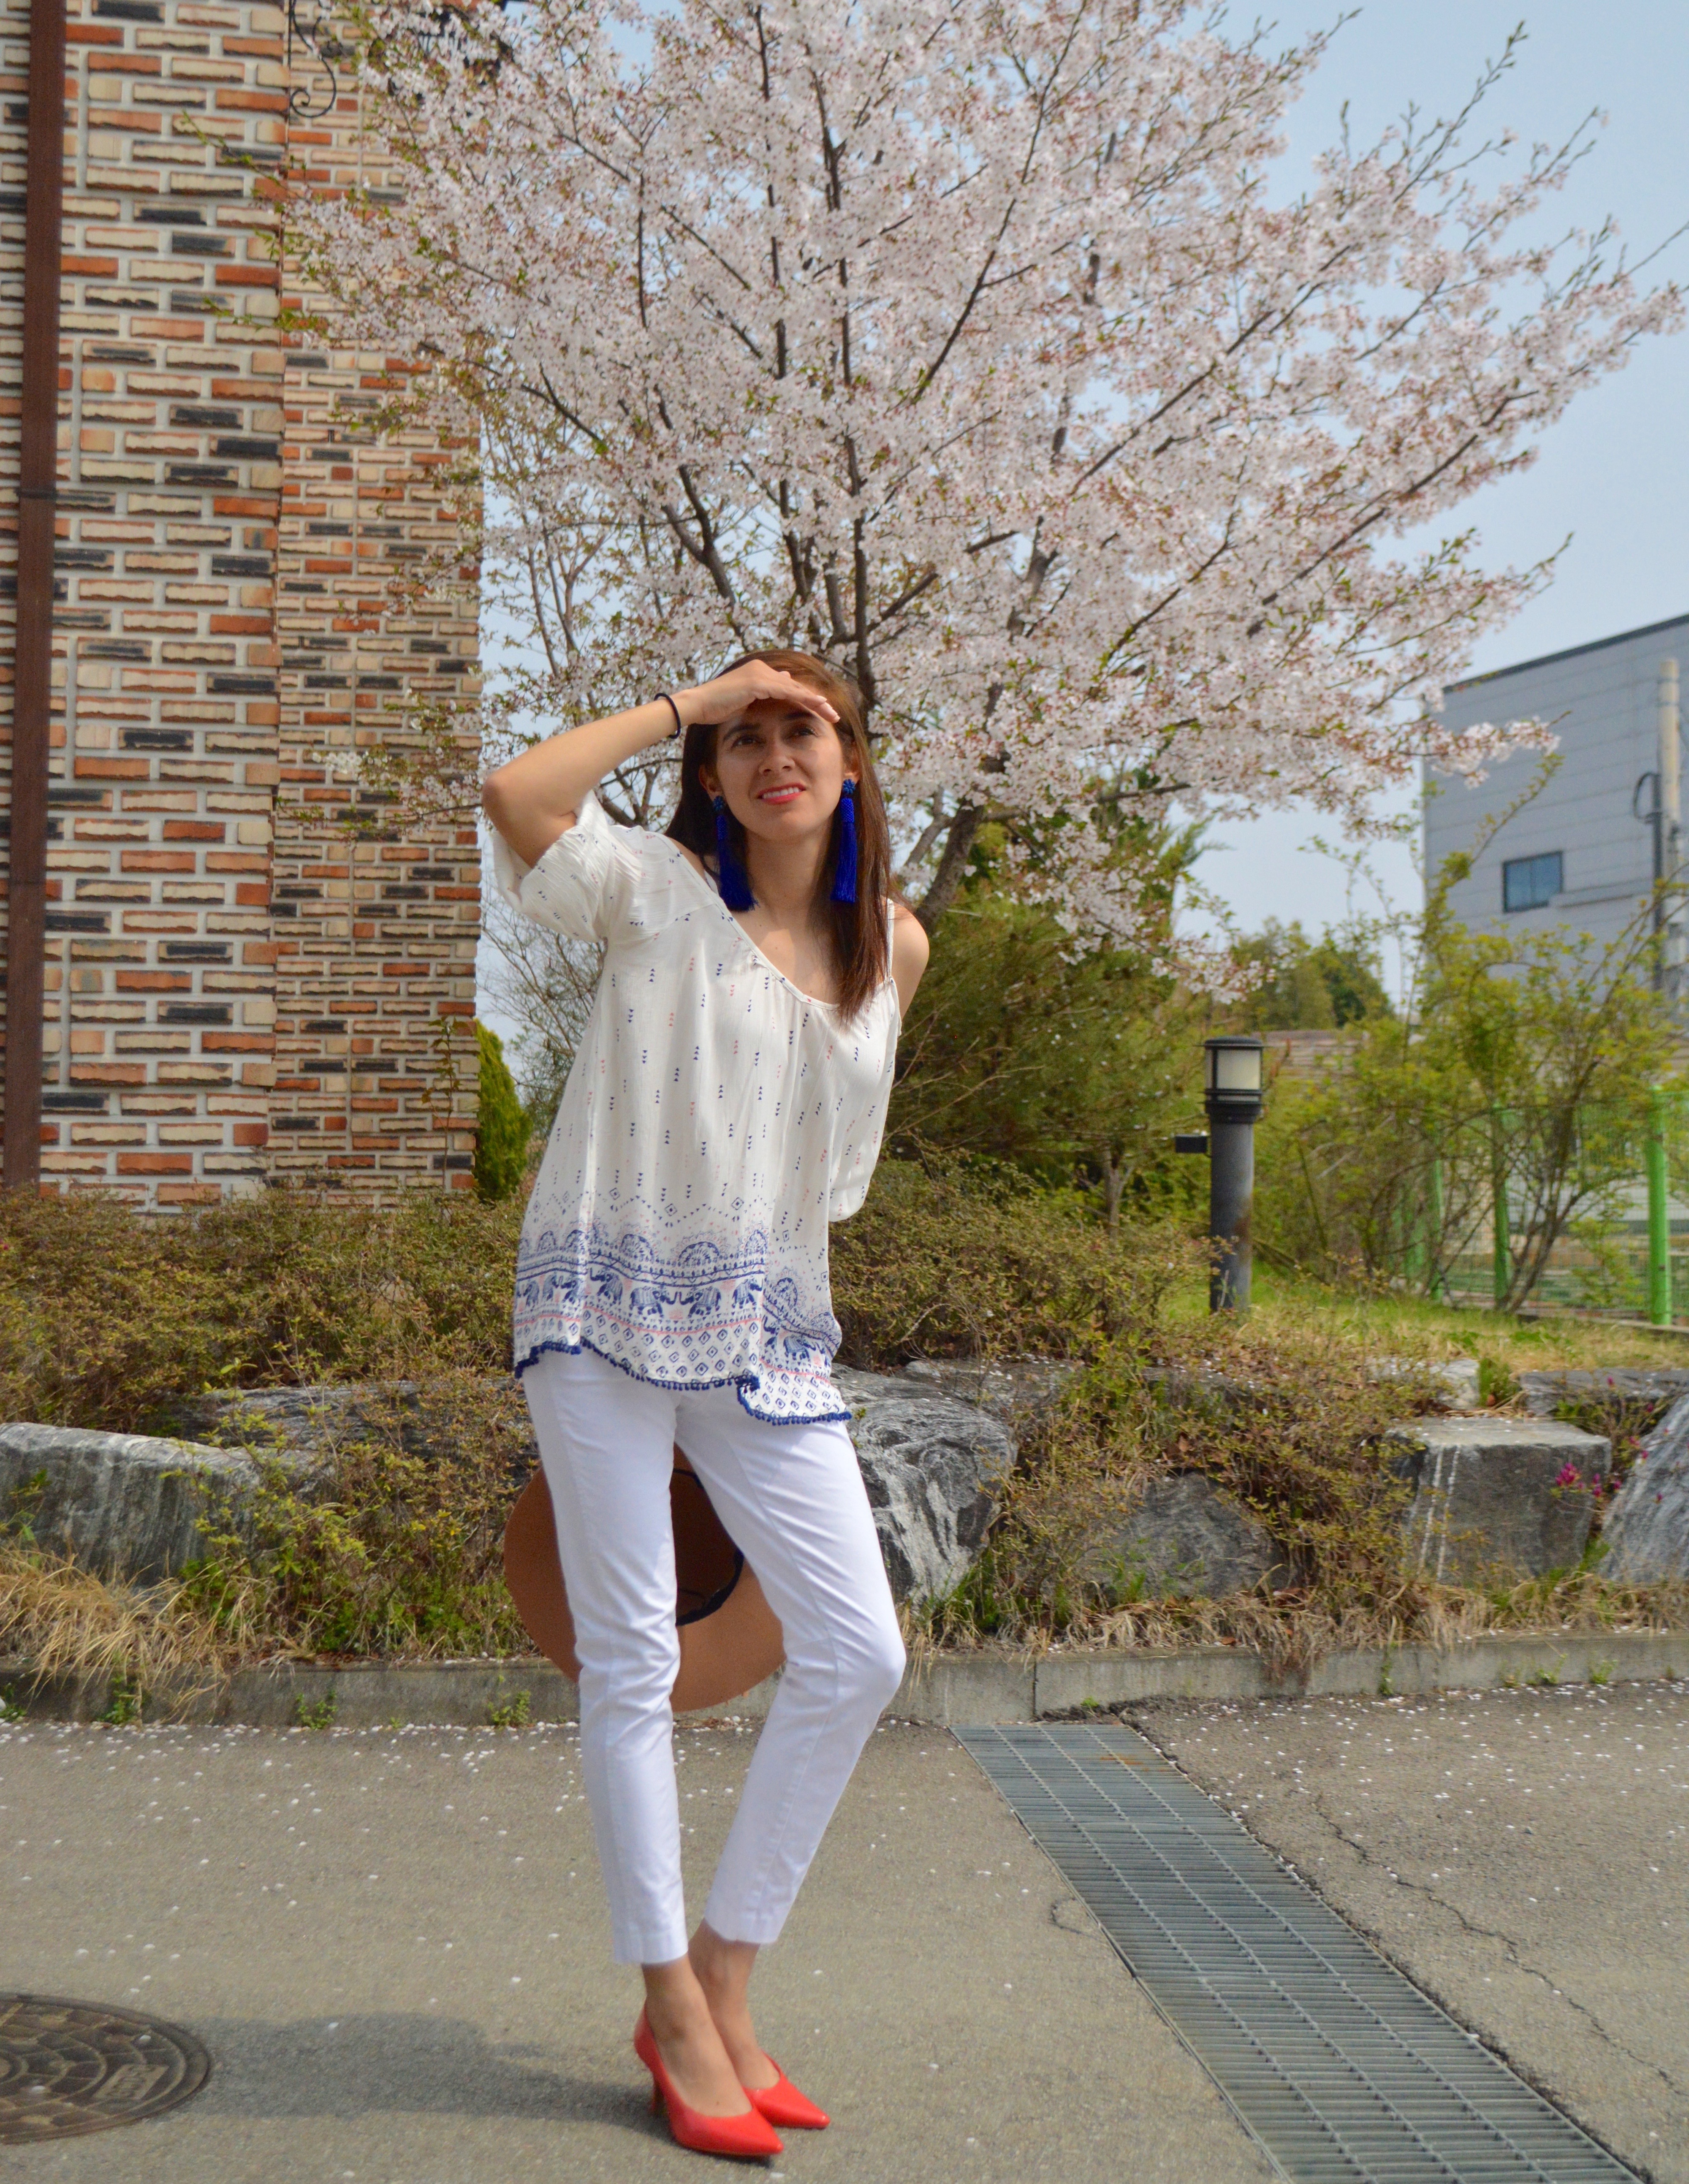 Warm Weather, Blossoms and a Cute Top!